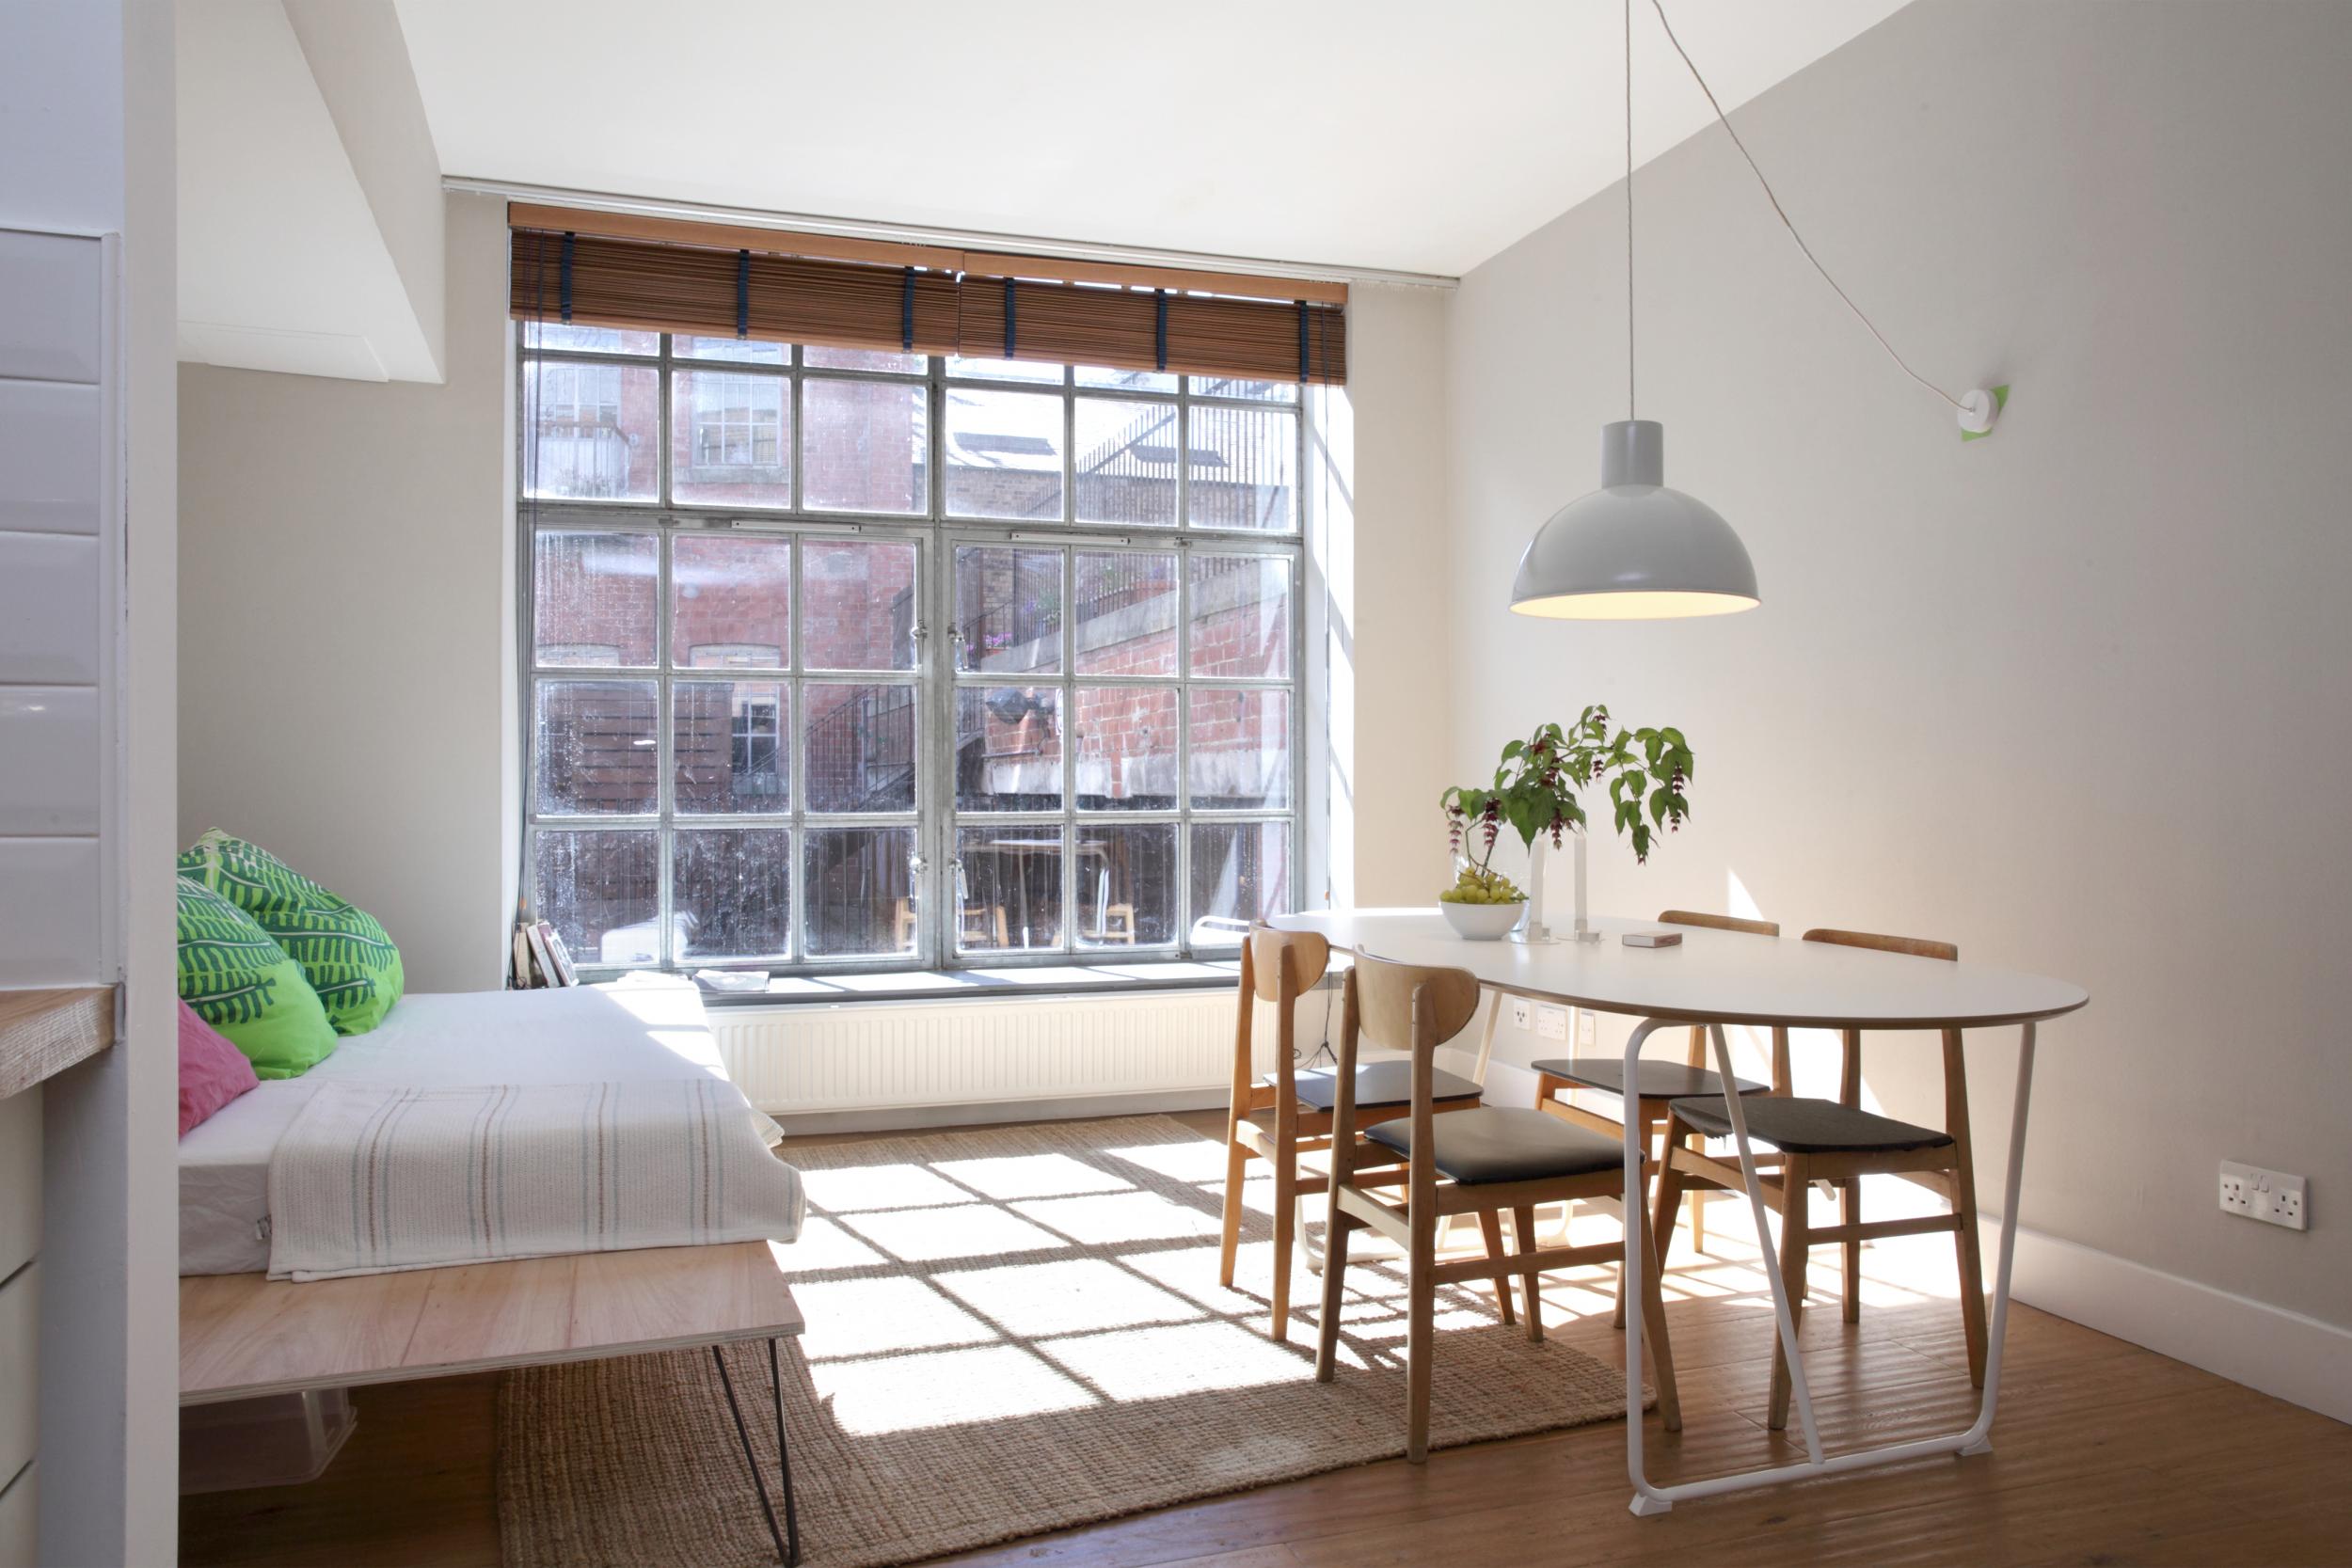 Marie Kondo fans will love the minimalist design of this converted factory